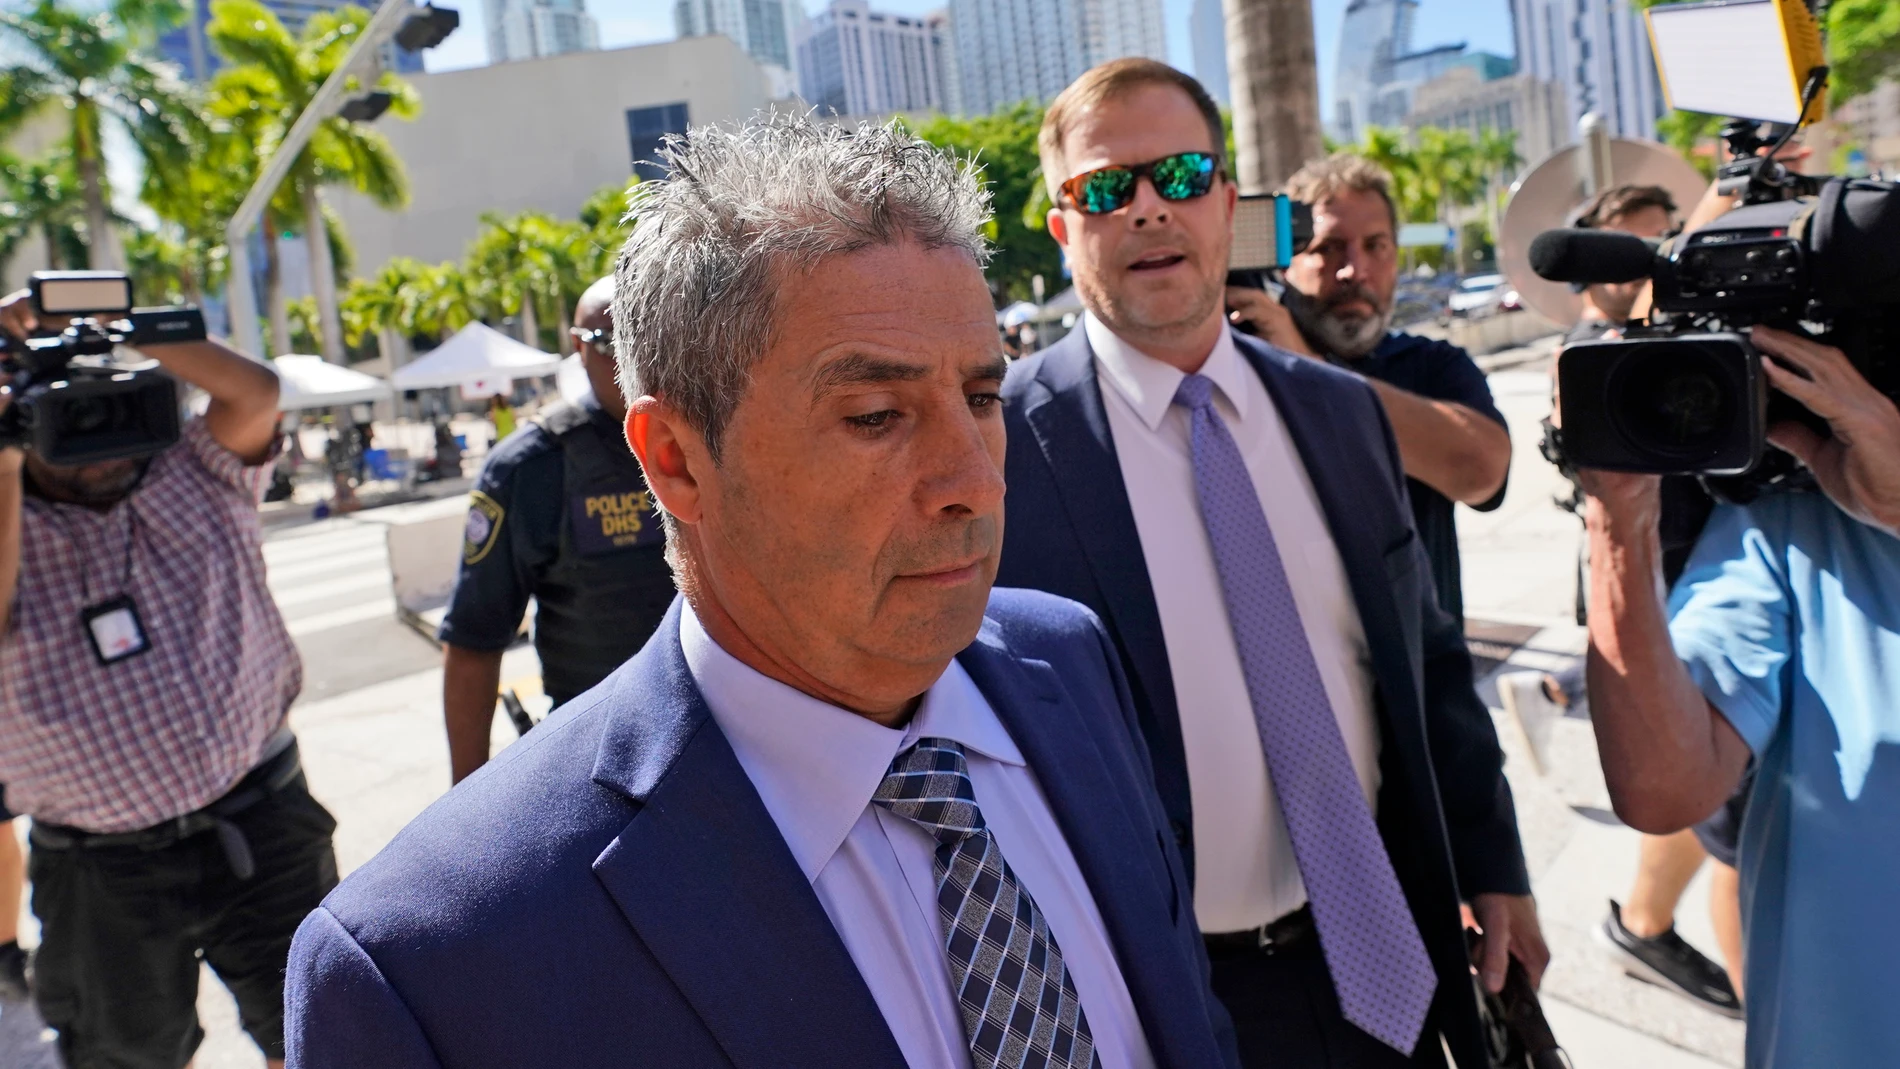 Carlos De Oliveira, center, an employee of Donald Trump's Mar-a-Lago estate, arrives for a court appearance with attorney John Irving, at the James Lawrence King Federal Justice Building, Monday, July 31, 2023, in Miami. De Oliveira, Mar-a-Lago's property manager, was added last week to the indictment with Trump and the former president's valet, Walt Nauta, in the federal case alleging a plot to illegally keep top-secret records at Trump's Florida estate and thwart government efforts to retri...